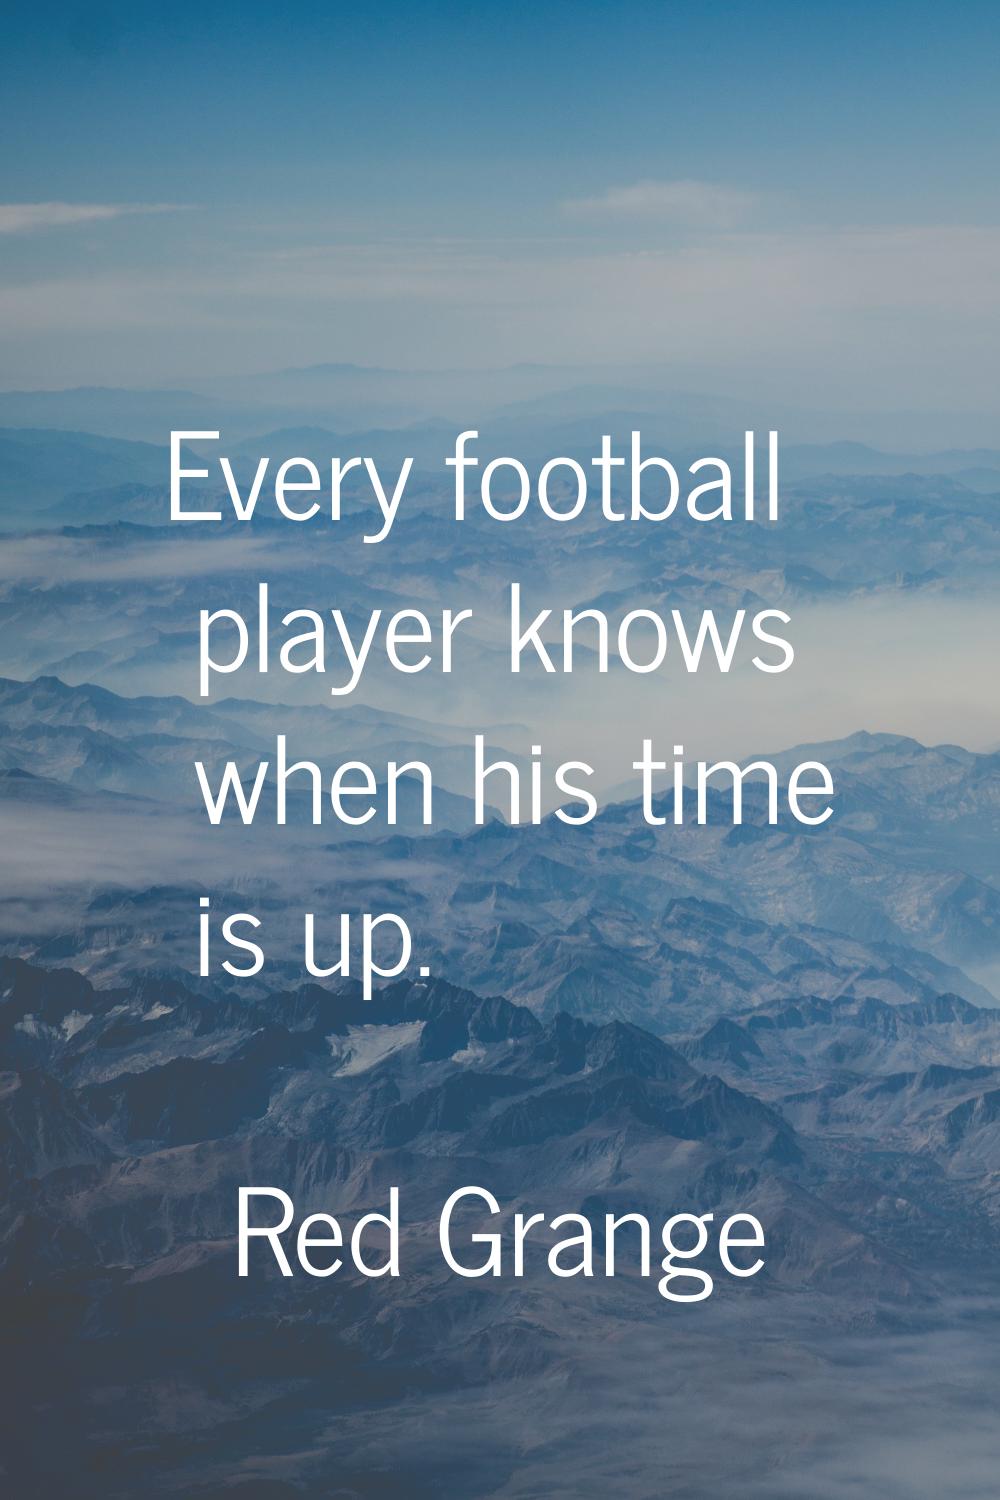 Every football player knows when his time is up.